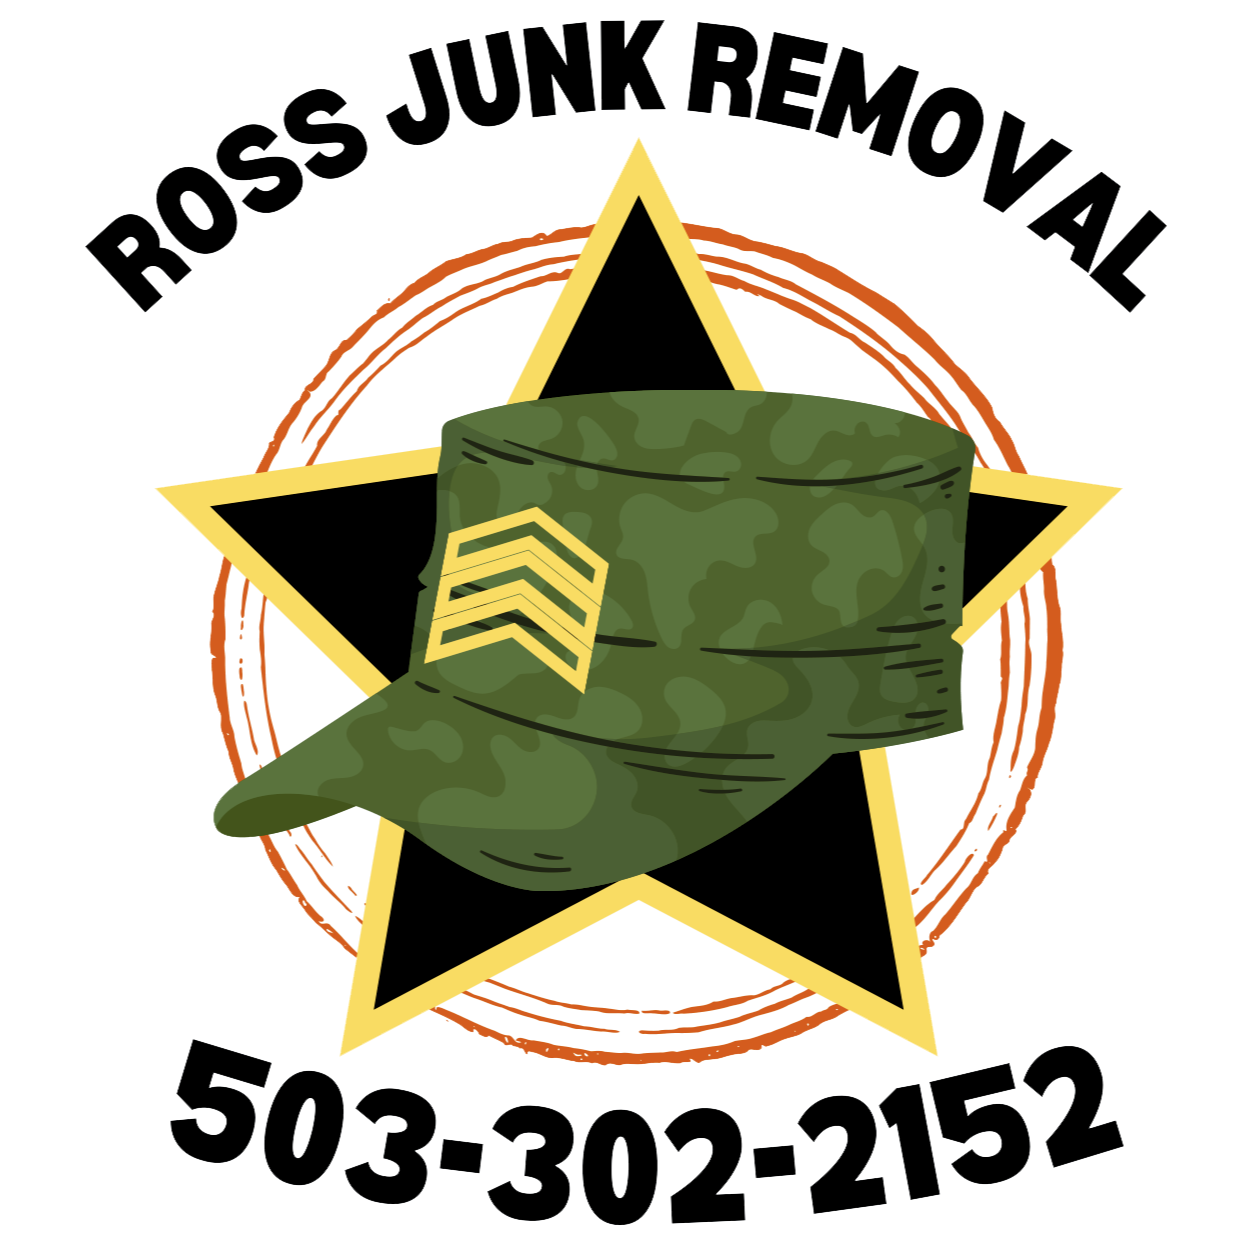 Ross Junk Removal - Keizer, OR - (503)302-2152 | ShowMeLocal.com